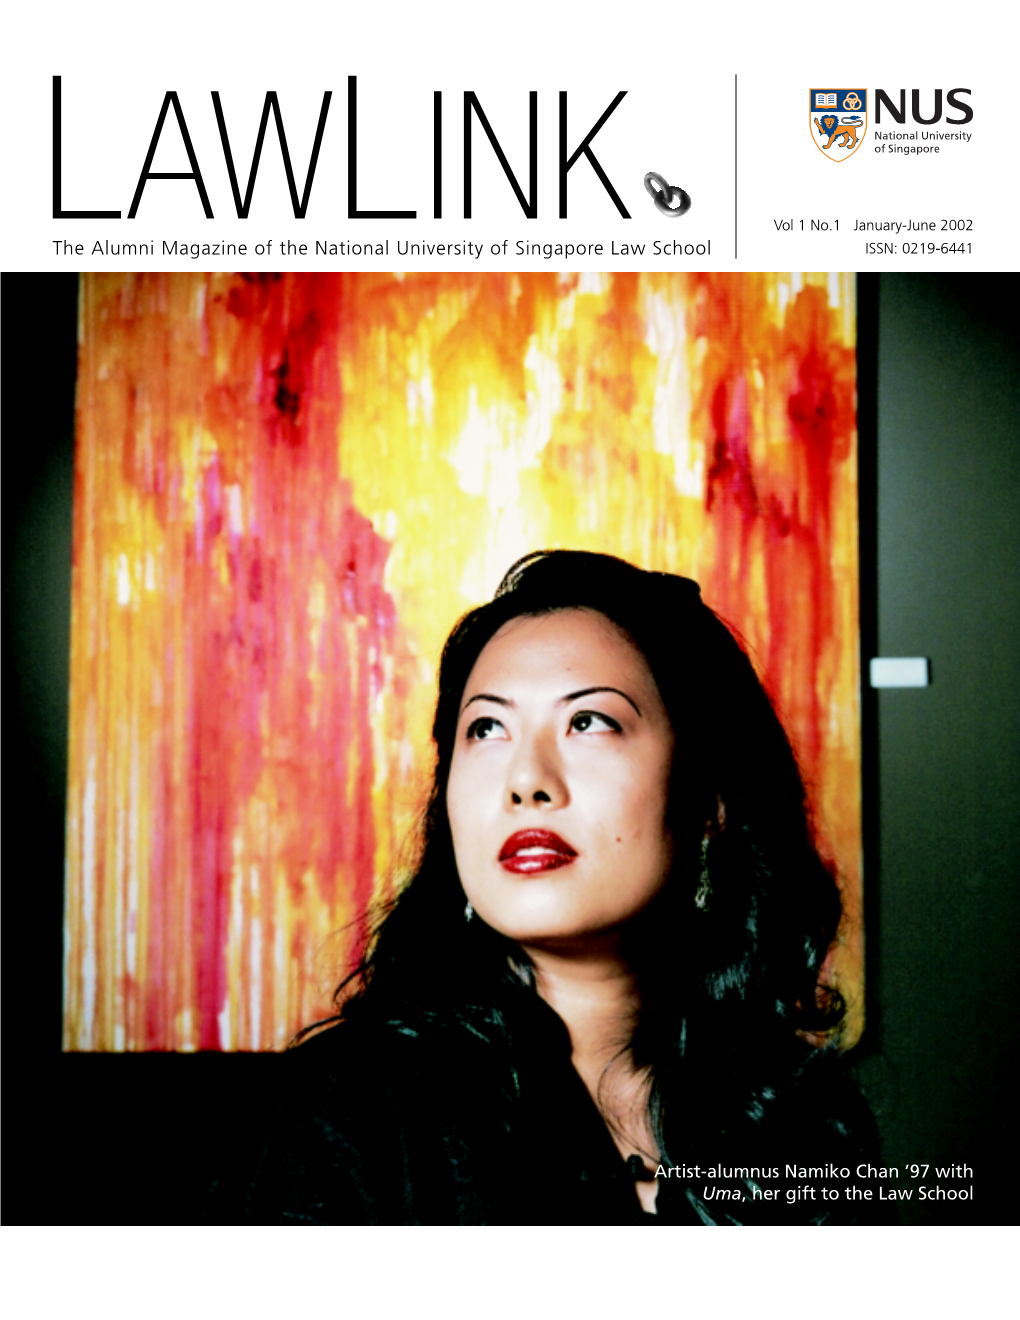 LAWLINK Vol 1 No.1 January-June 2002 the Alumni Magazine of the National University of Singapore Law School ISSN: 0219-6441